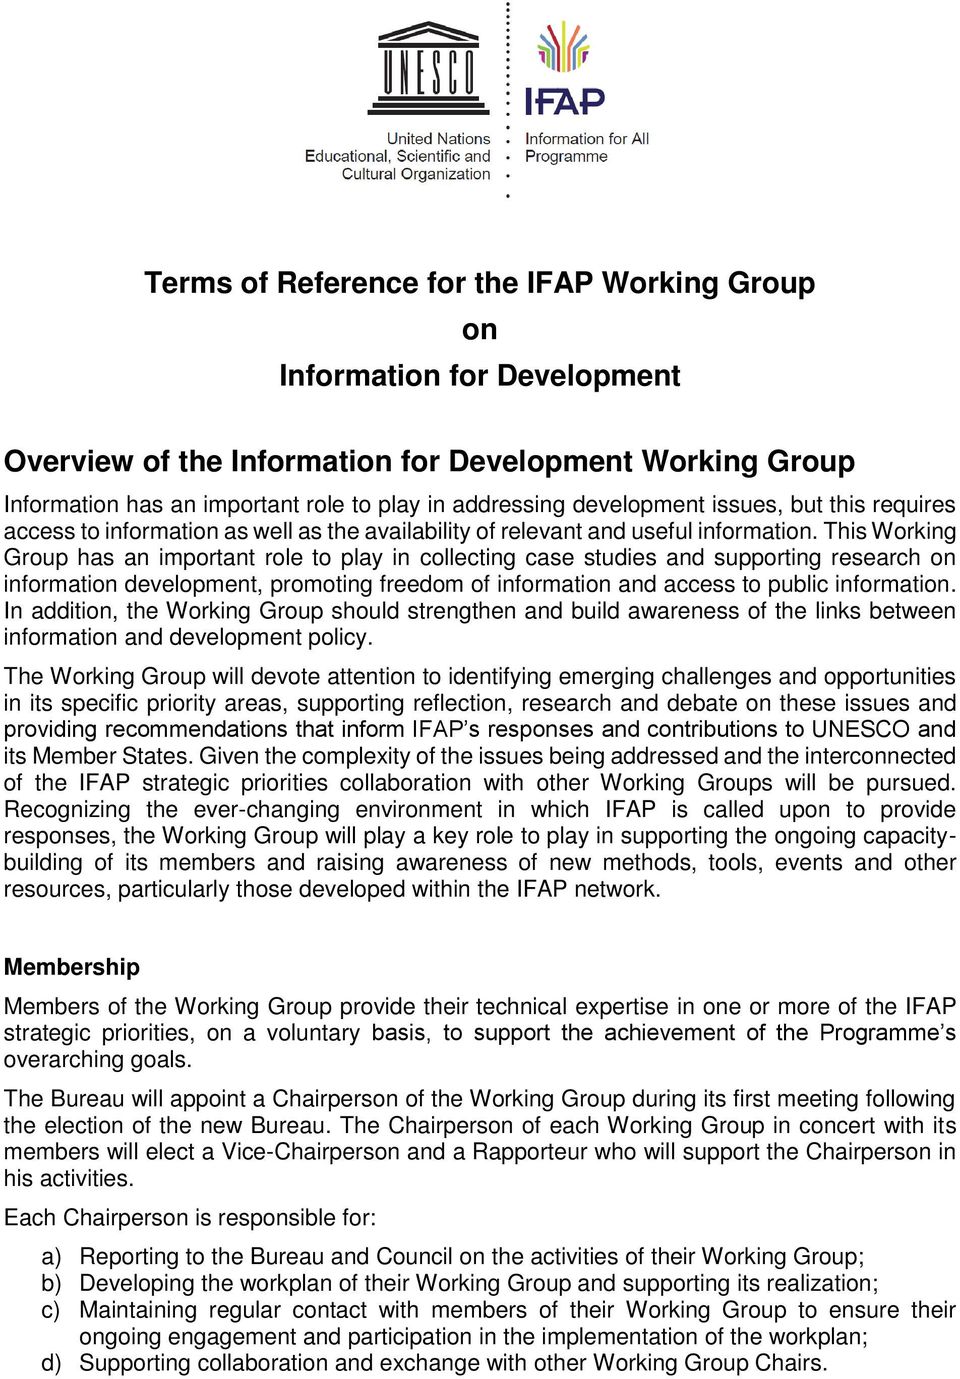 This Working Group has an important role to play in collecting case studies and supporting research on information development, promoting freedom of information and access to public information.